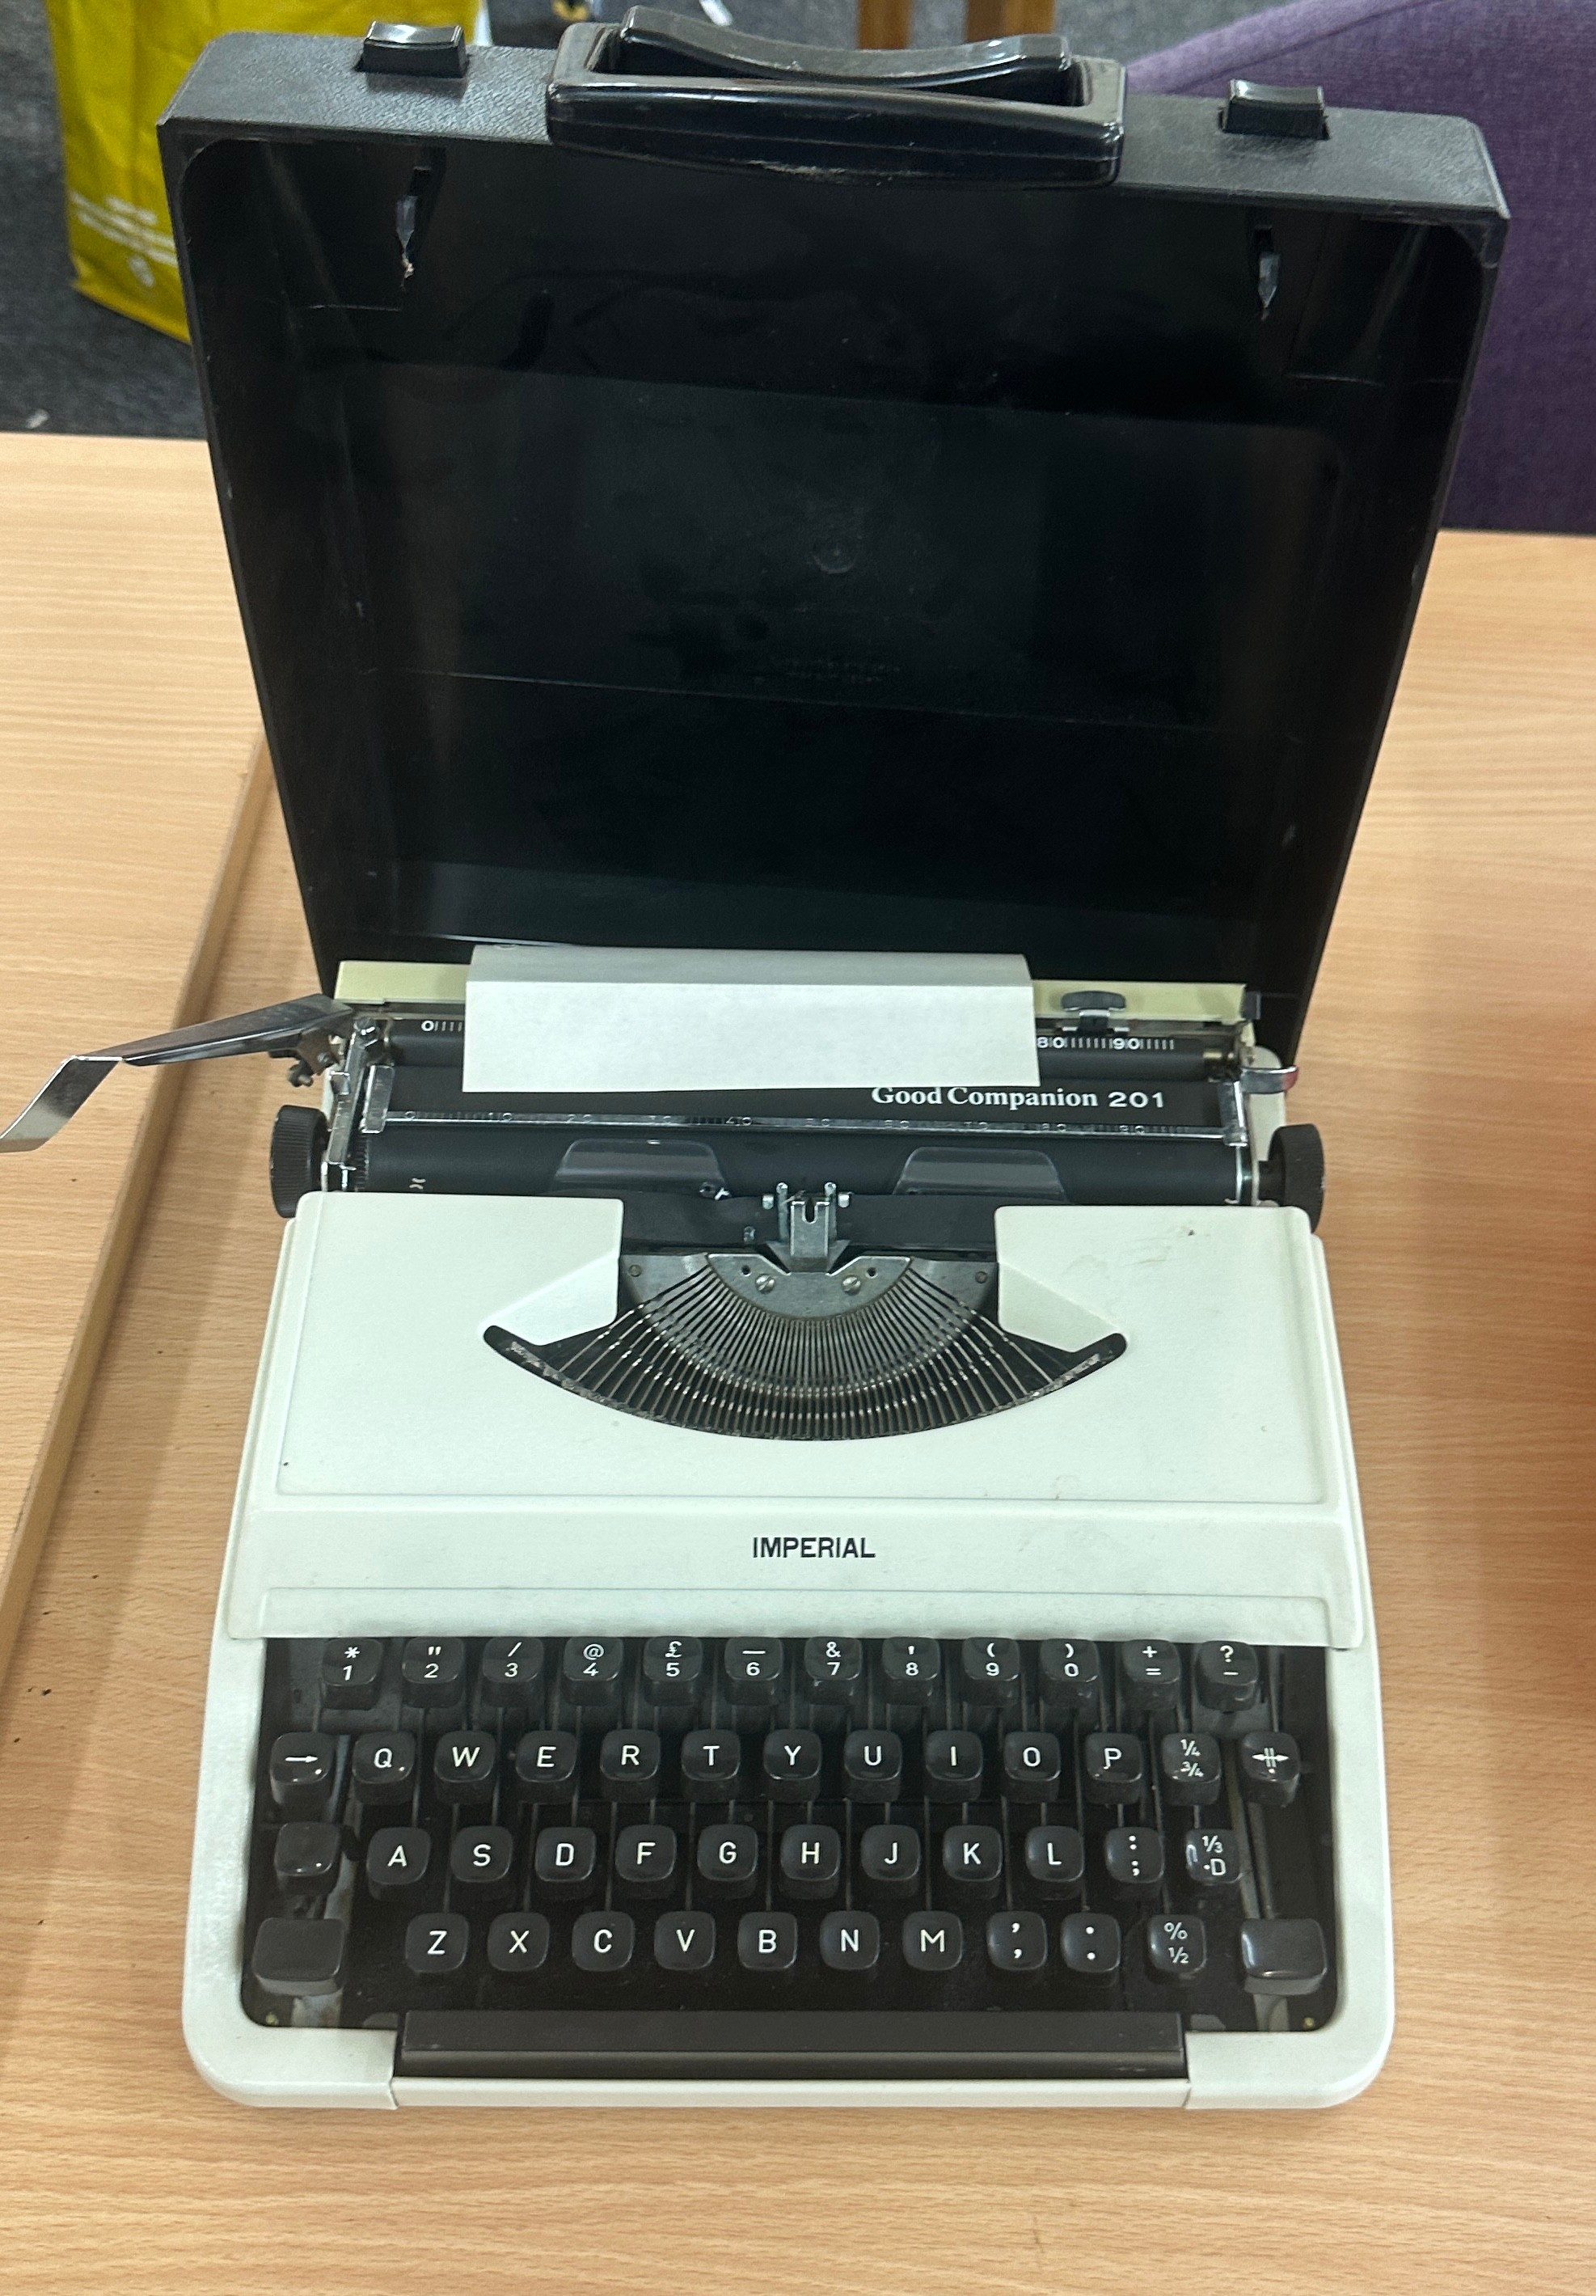 Cased imperial typewriter, good companion 201